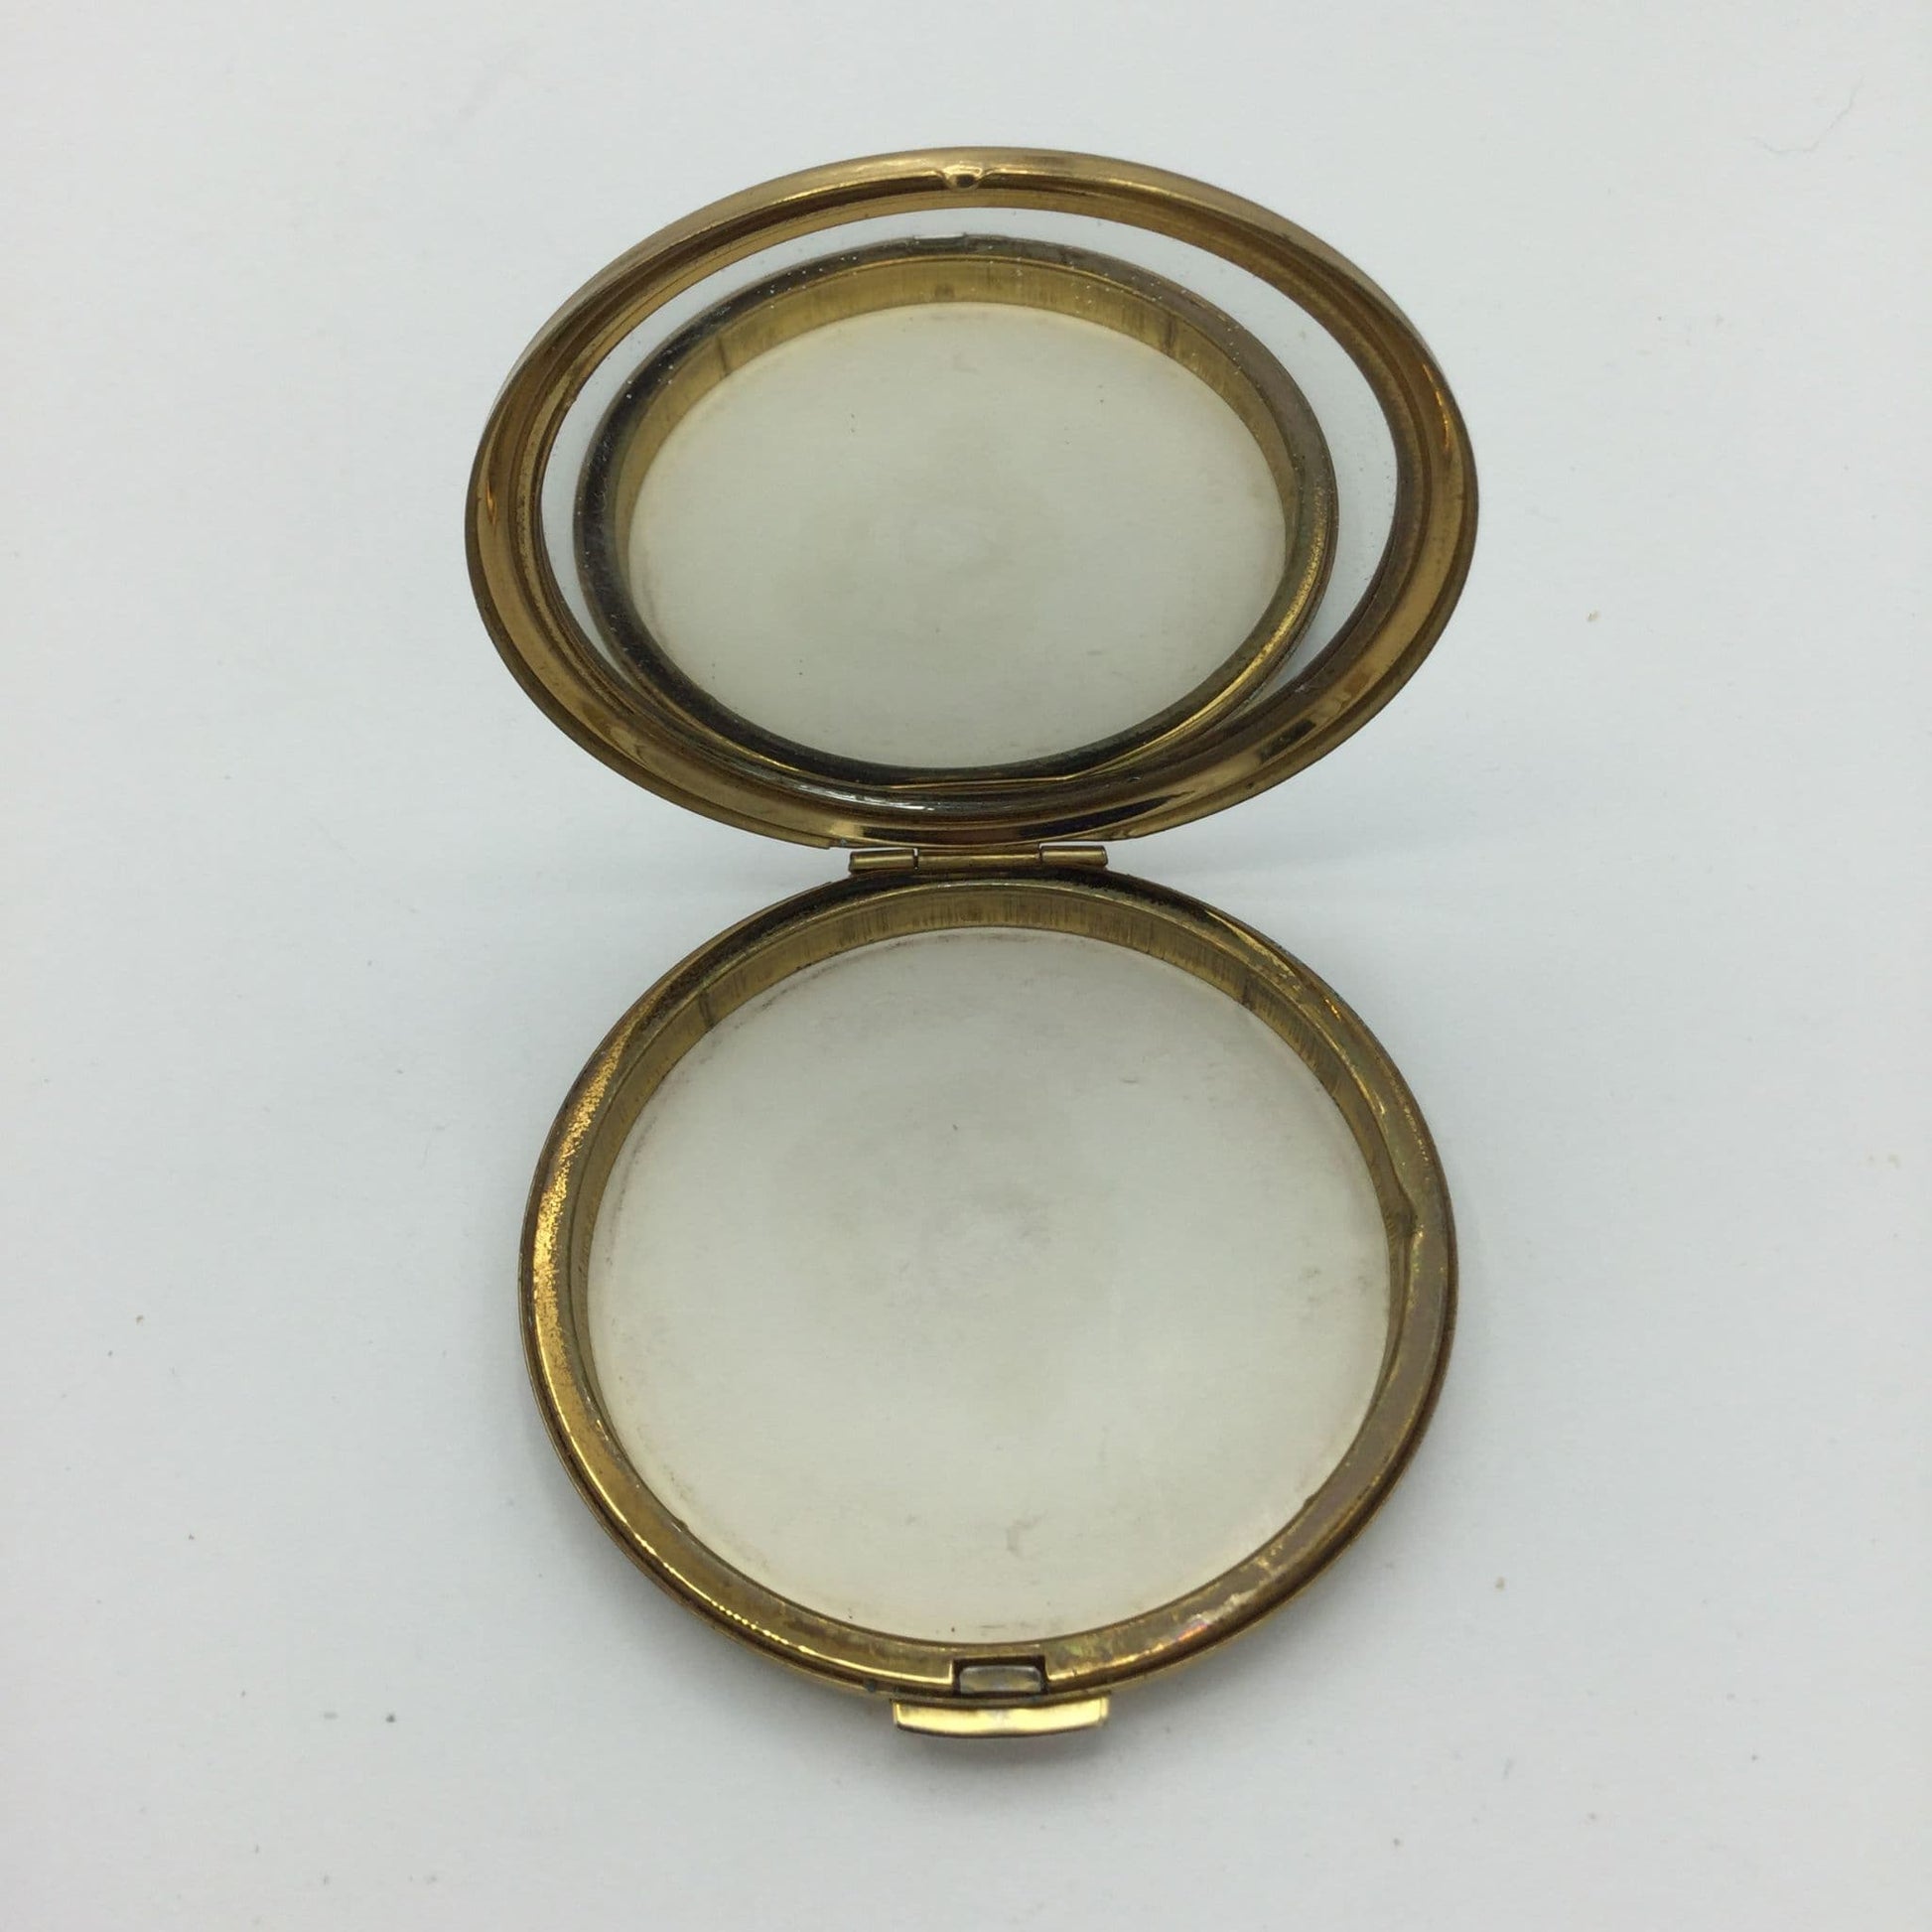 Gold edged compact with a clear mirror open on a white background